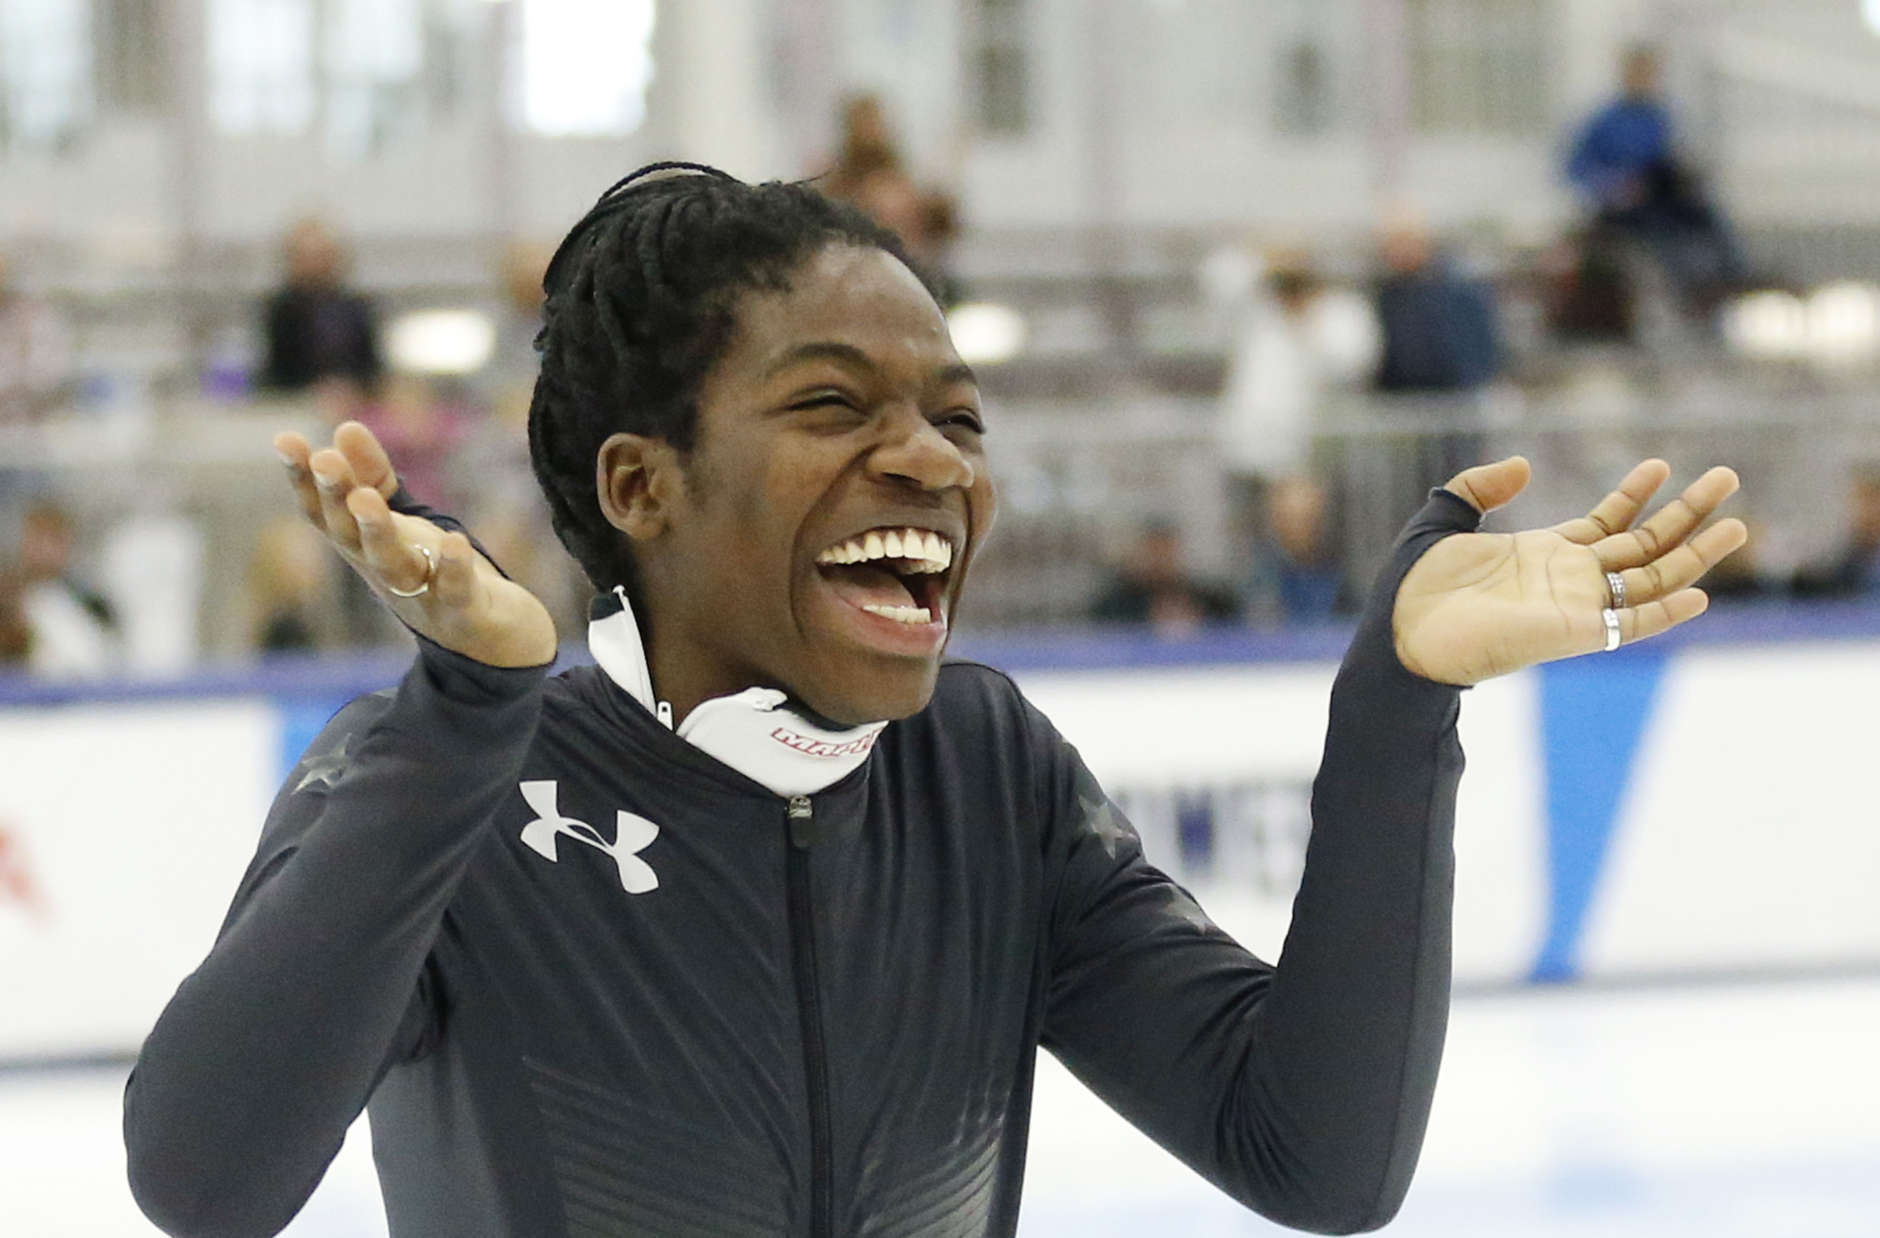 Maame Biney reacts during a medal ceremony after winning women's 500-meter A final race during the U.S. Olympic short track speedskating trials Saturday, Dec. 16, 2017, in Kearns, Utah. (AP Photo/Rick Bowmer)